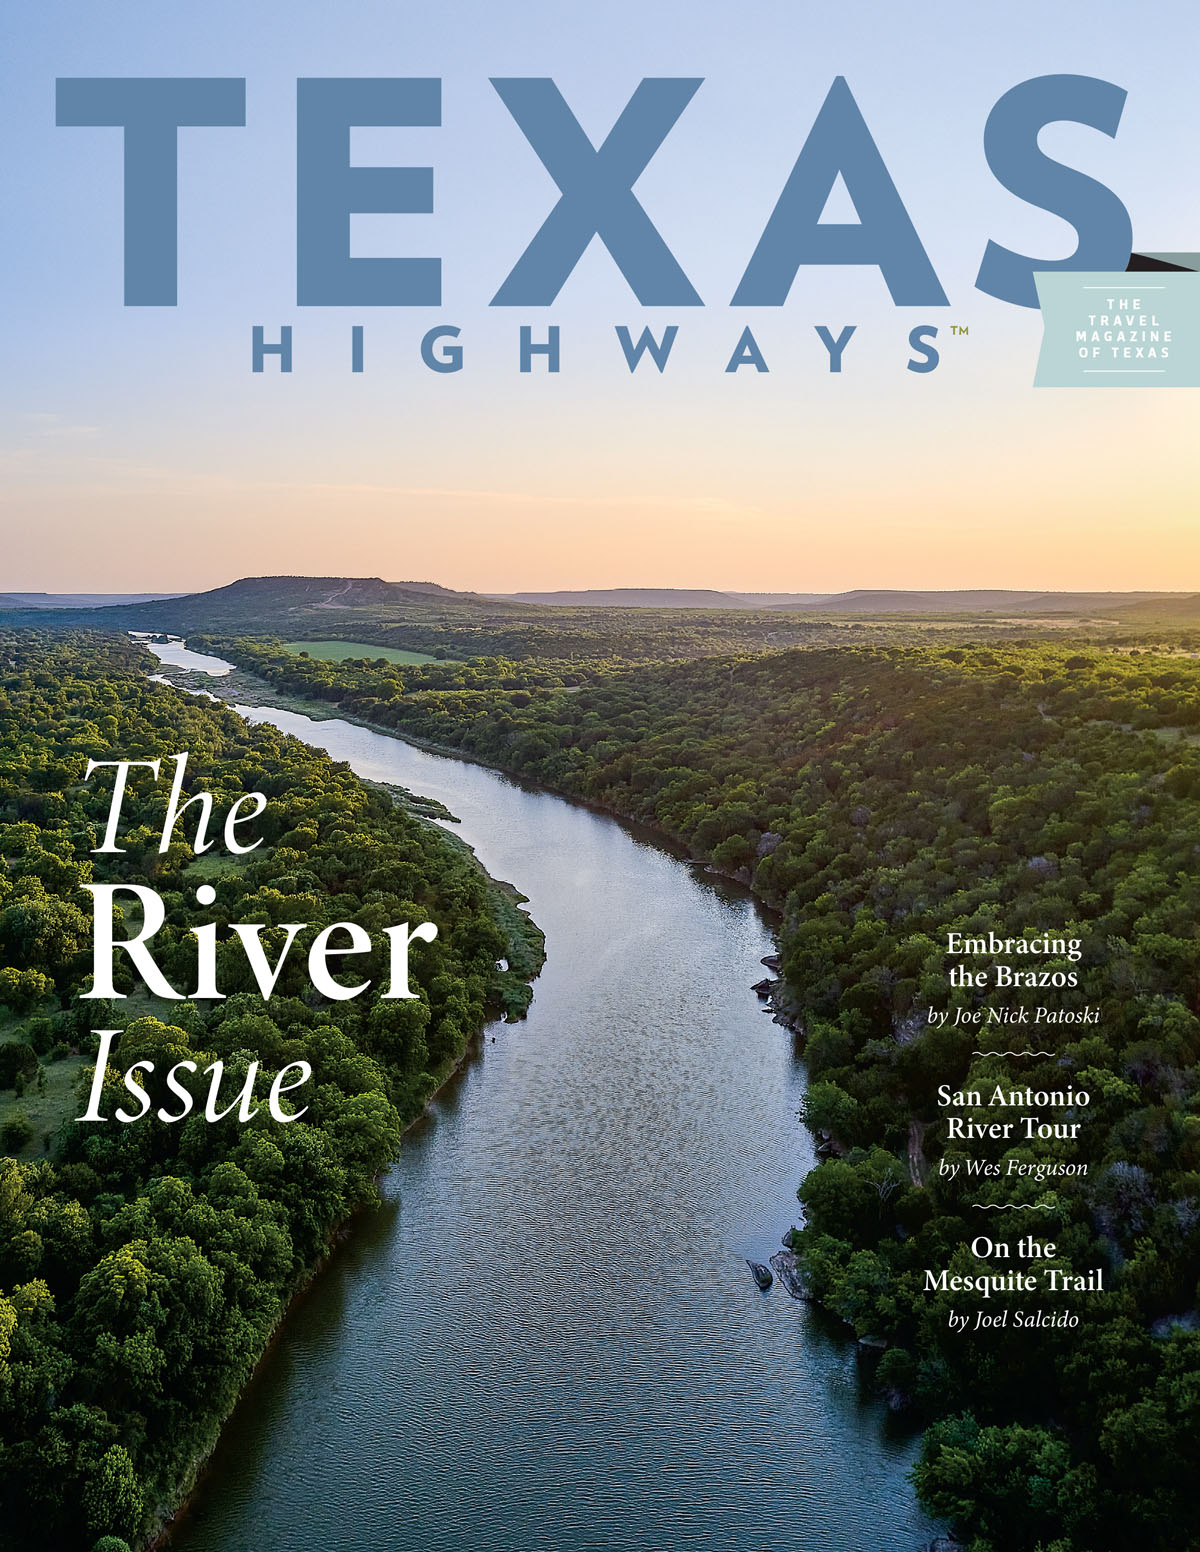 The June 2022 cover of Texas Highways Magazine, featuring an illustration of Texas objects and the text "Postcards from the Perimeter"